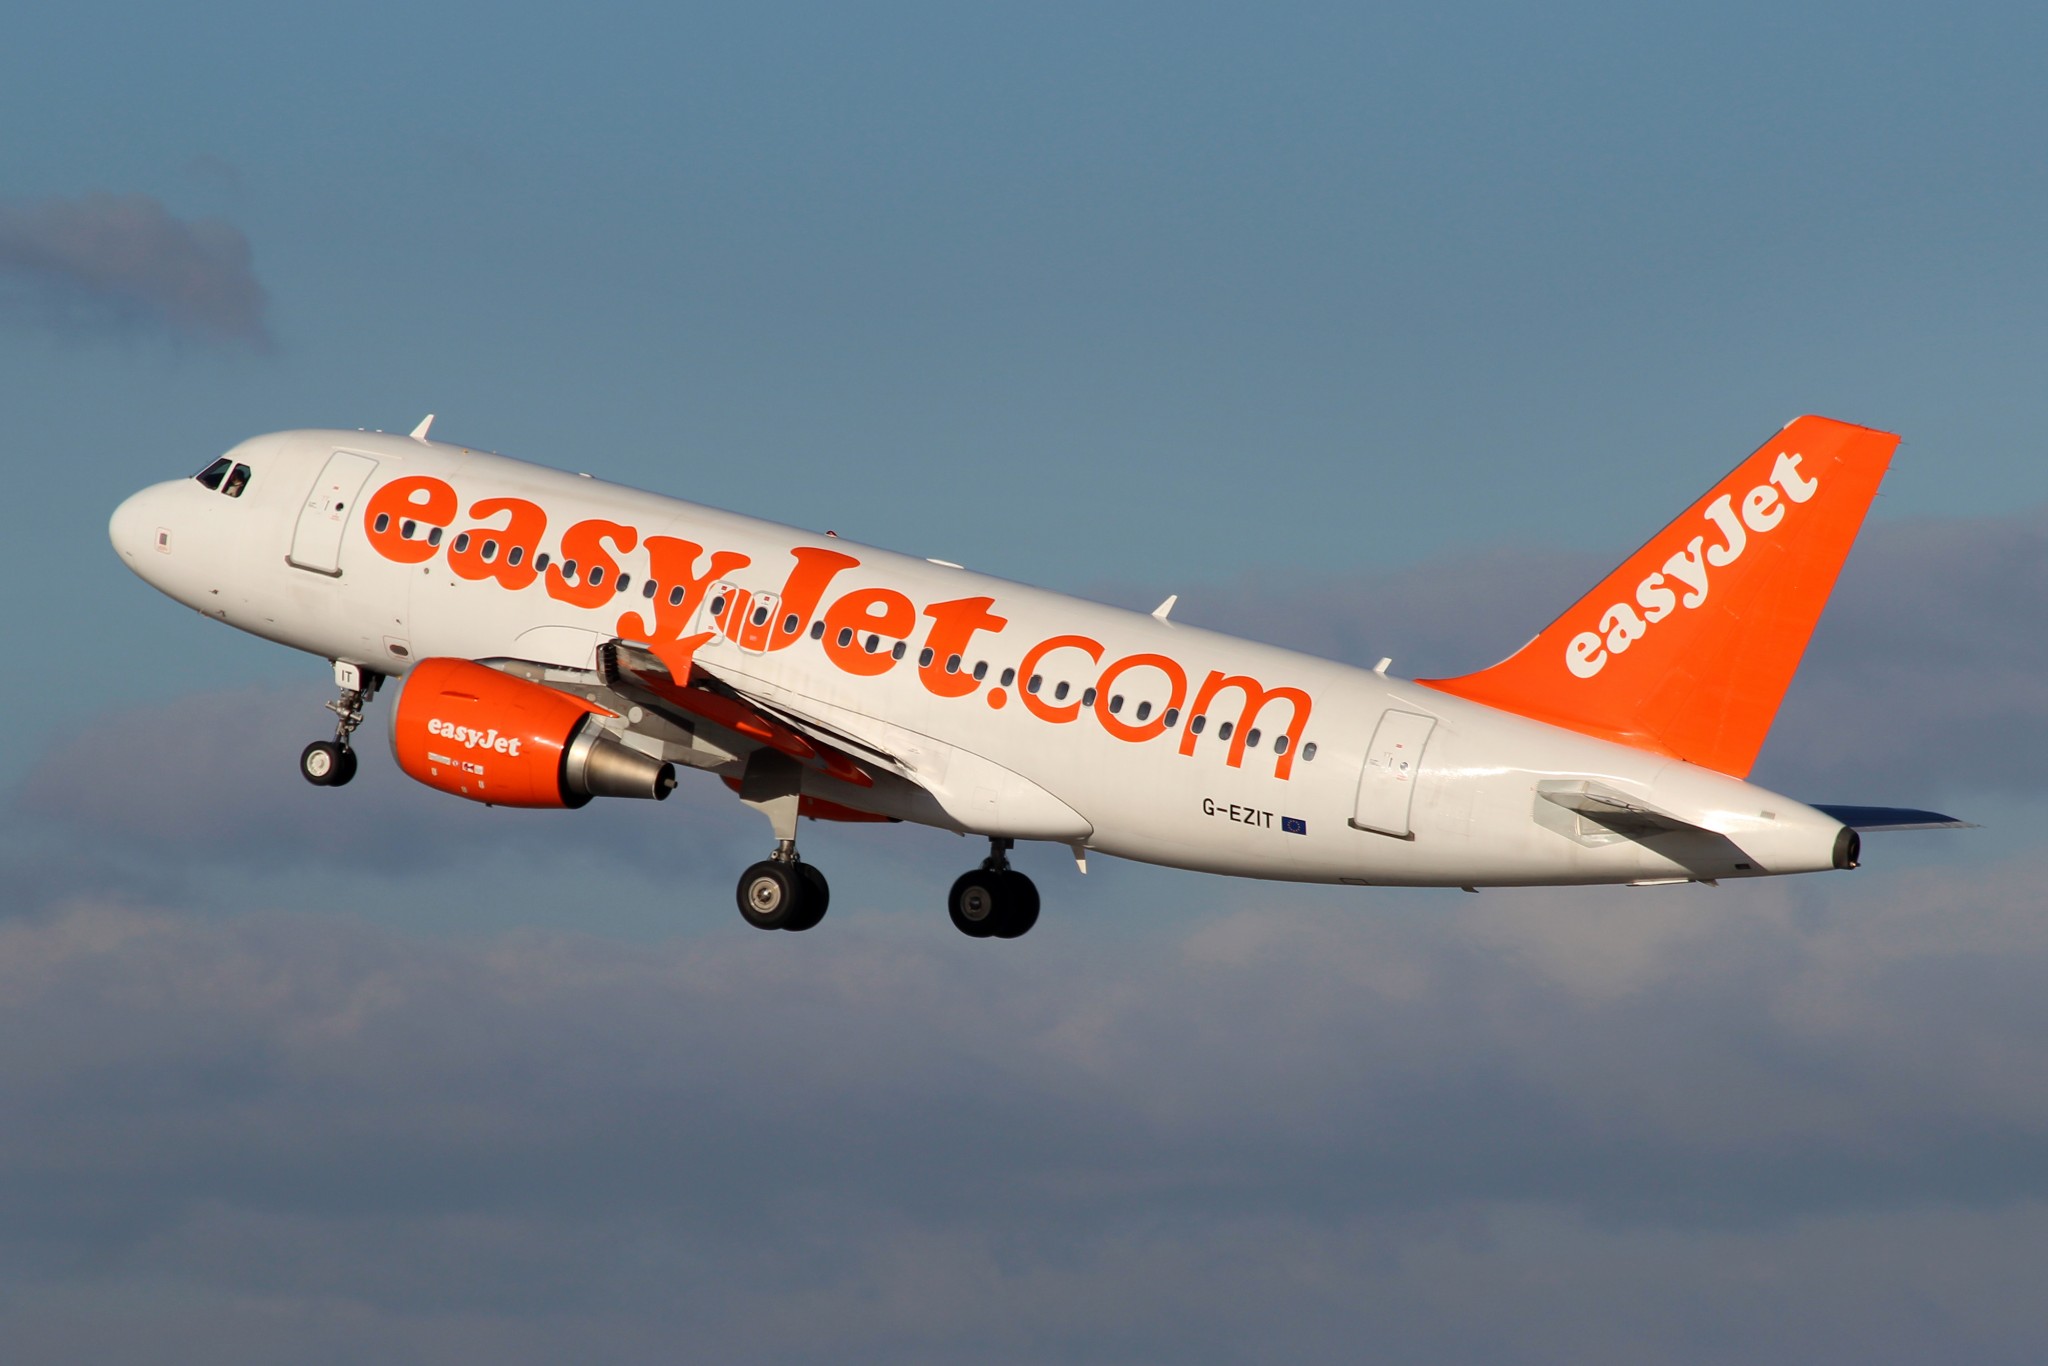 EasyJet raises $266 million from sale and leaseback